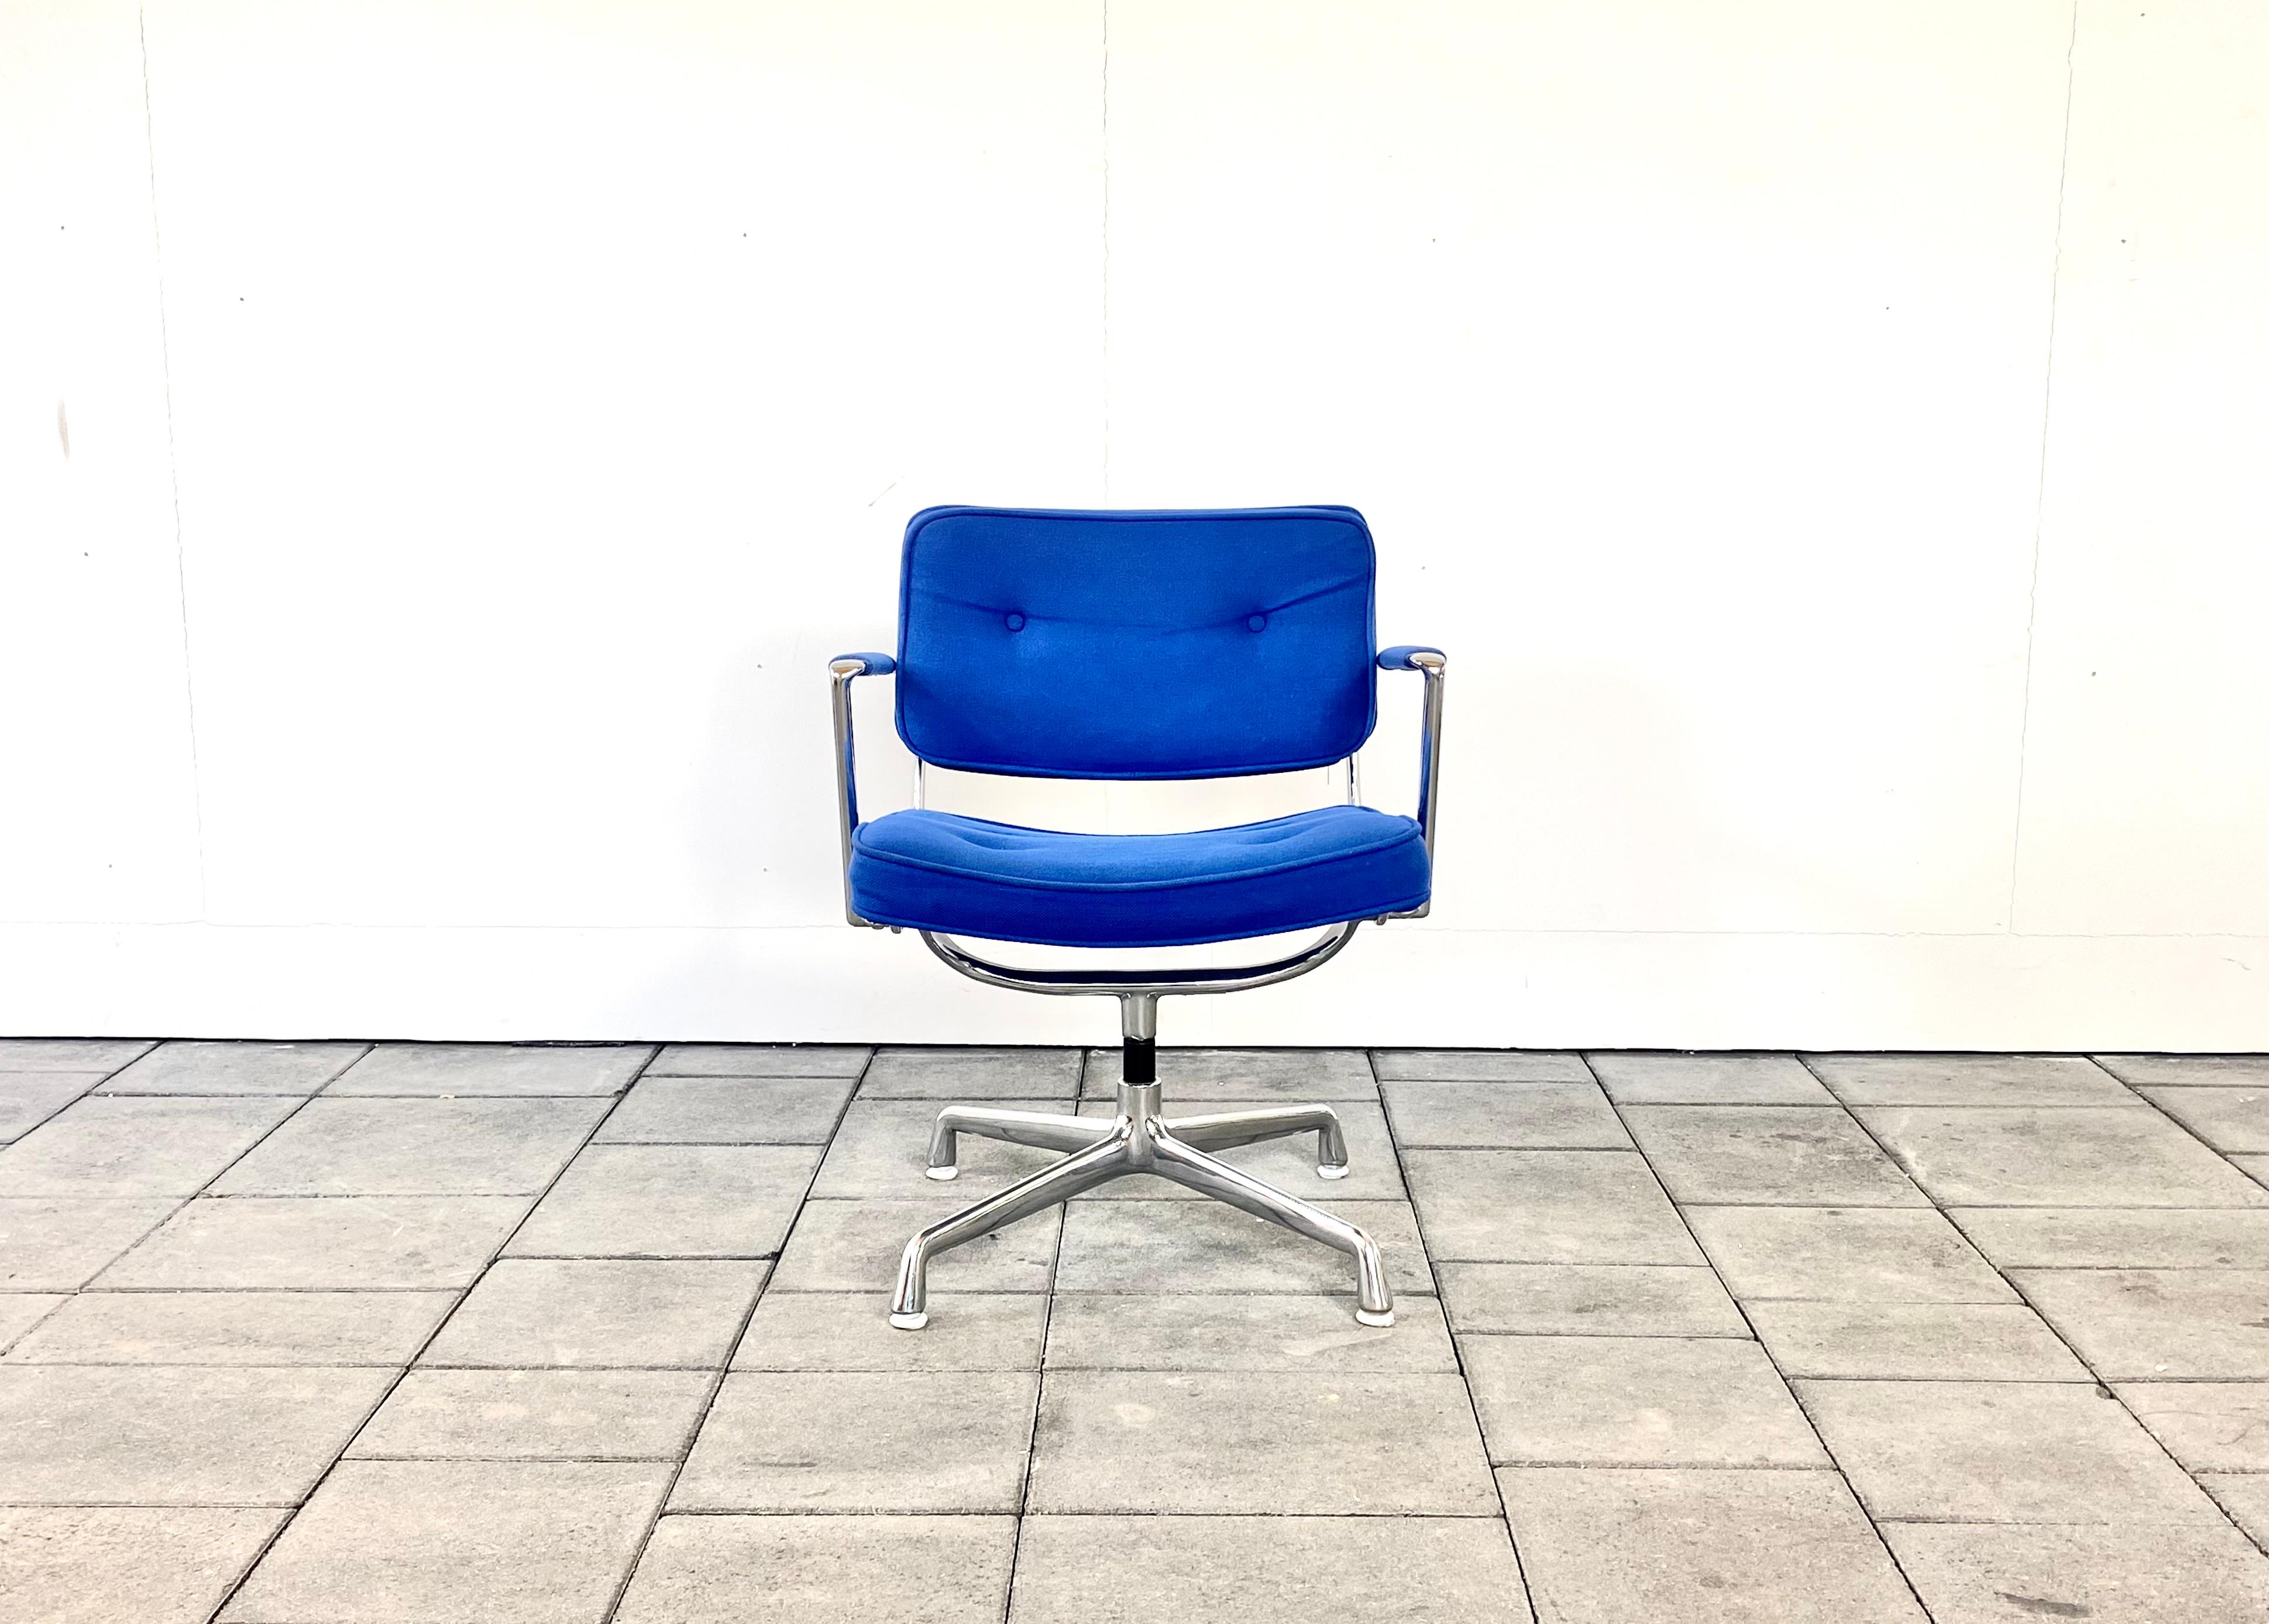 rare Herman Miller ES102 Intermediate Desk chair designed by Charles & Ray Eames

Upholstery in blue Hopsack fabric, with chromed aluminium parts, equipped with shivel function.

The chair is in very good vintage condition with signs of use